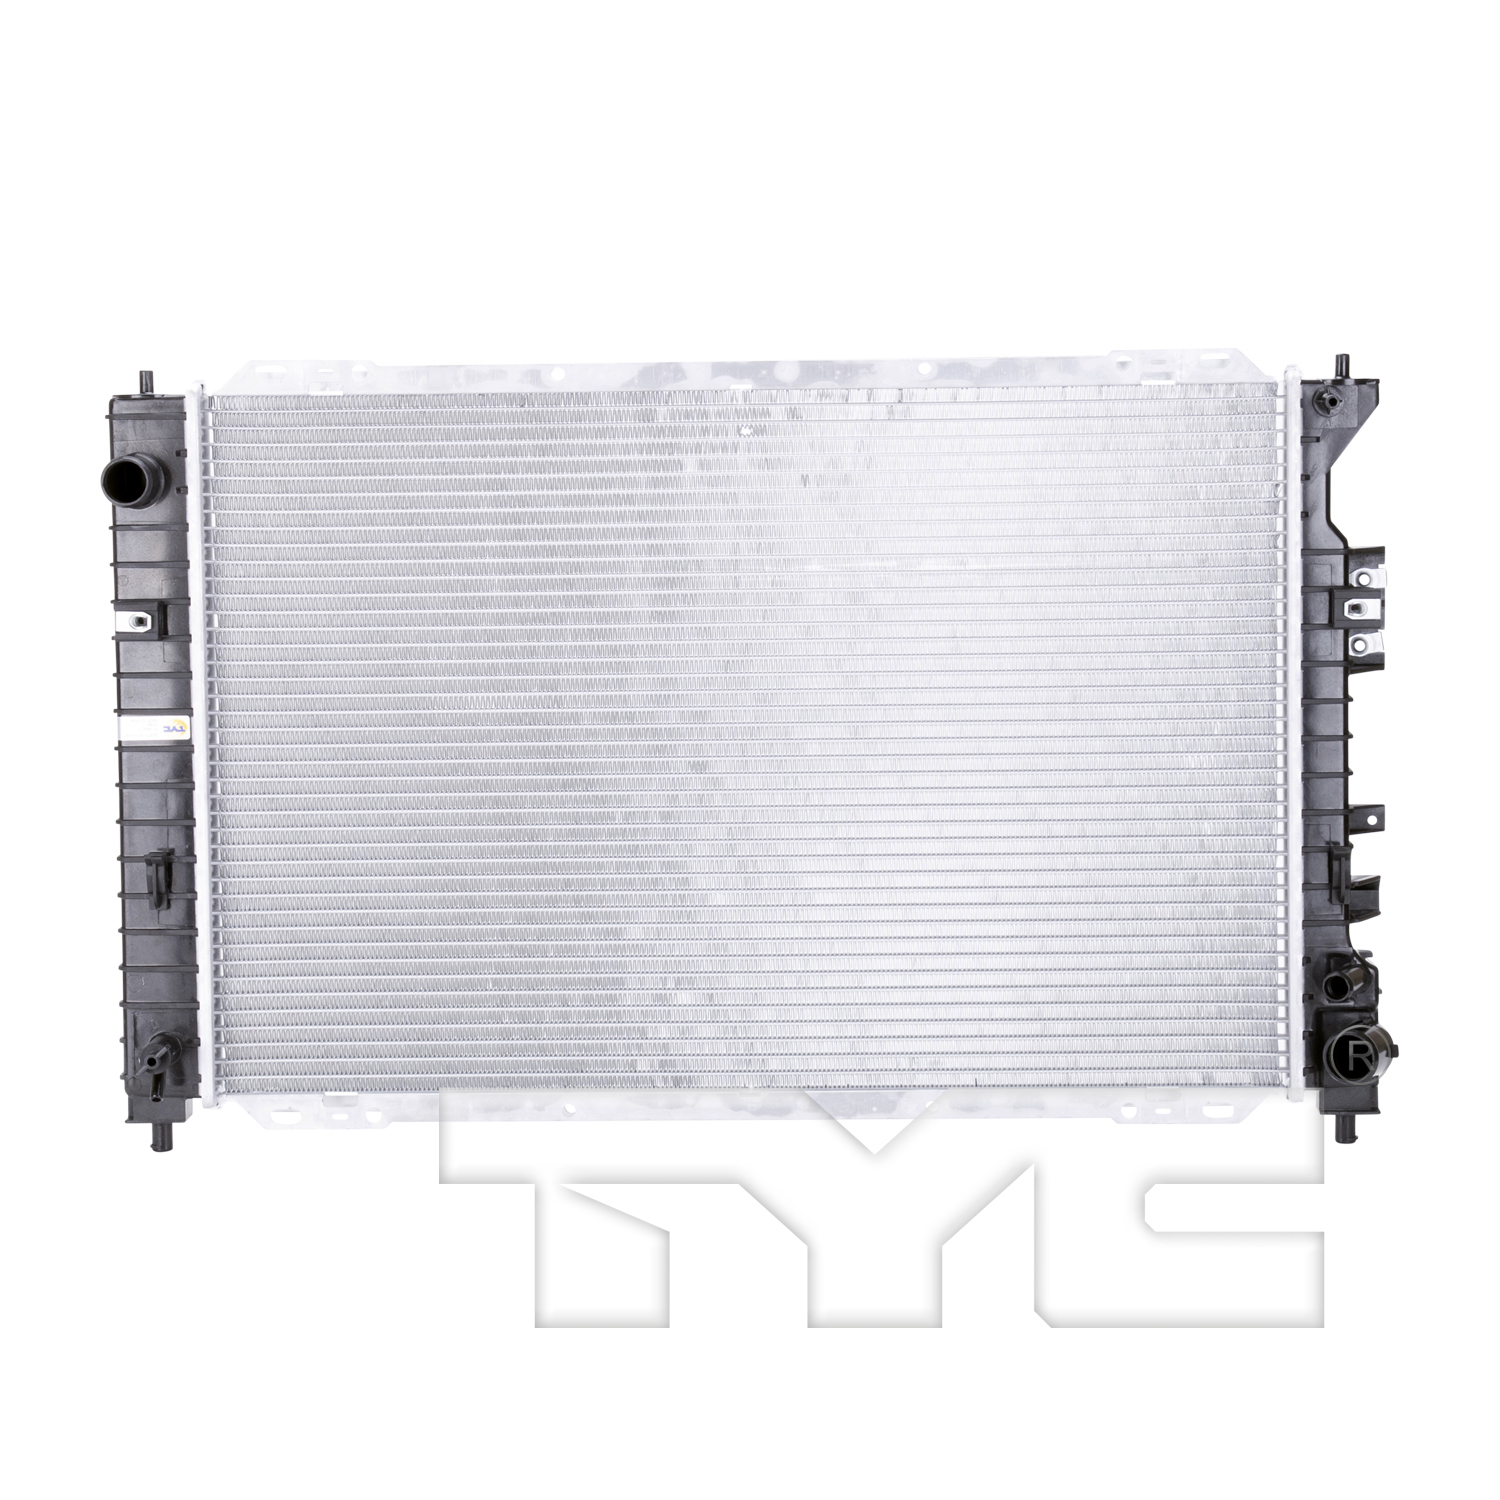 Aftermarket RADIATORS for FORD - ESCAPE, ESCAPE,05-07,Radiator assembly